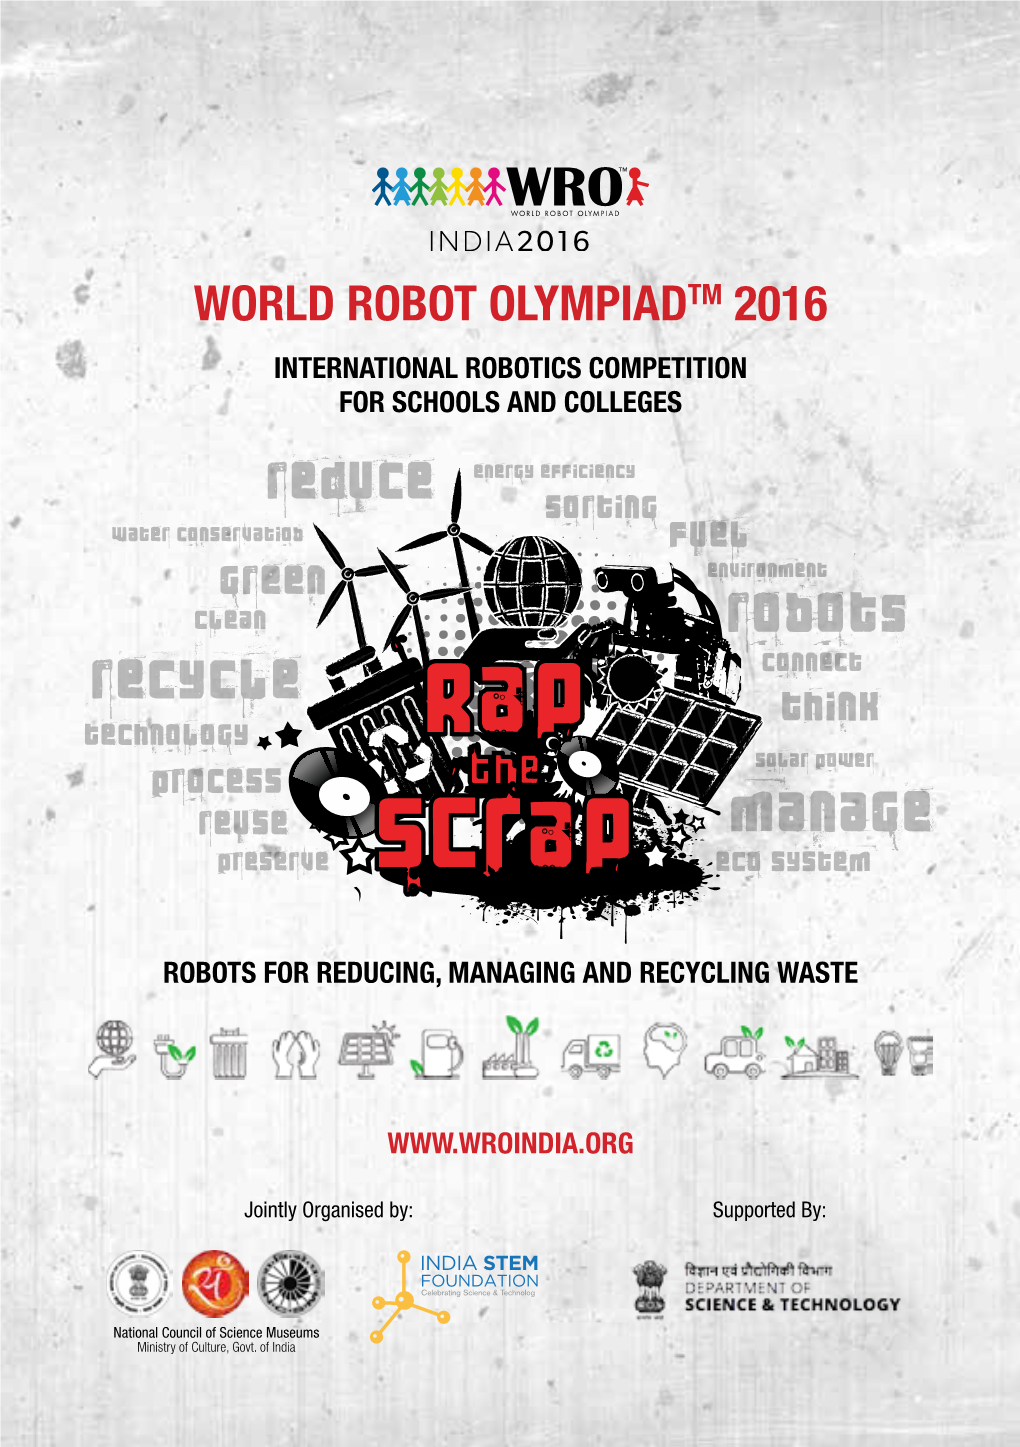 WORLD ROBOT OLYMPIADTM 2016 International Robotics Competition for Schools and Colleges